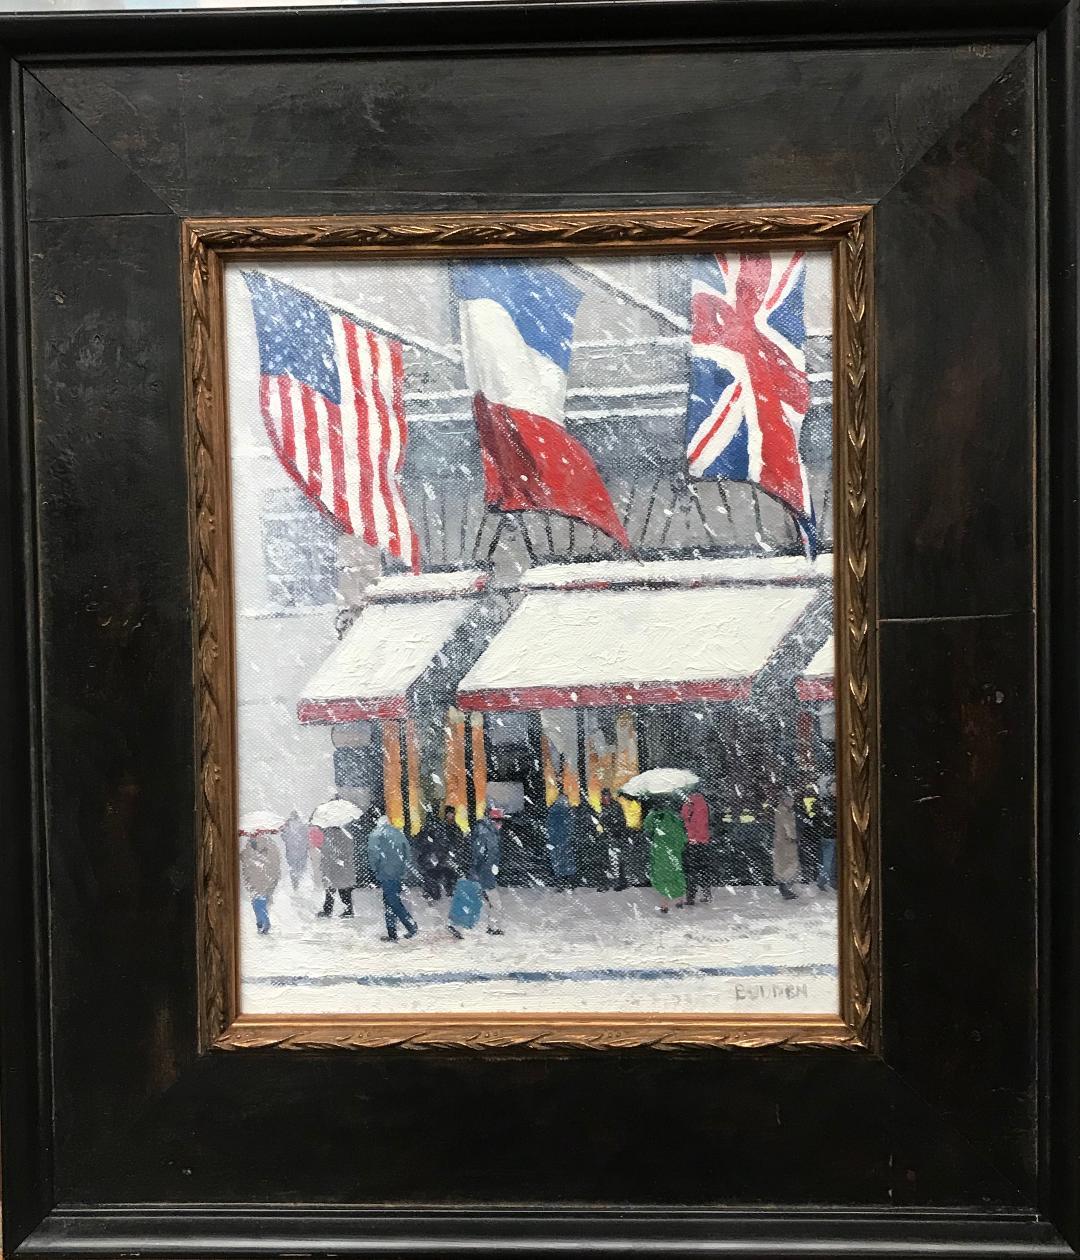 Michael Budden Landscape Painting - Winter At Cartier's, Iconic Flags, Contemporary Oil Painting of New York City